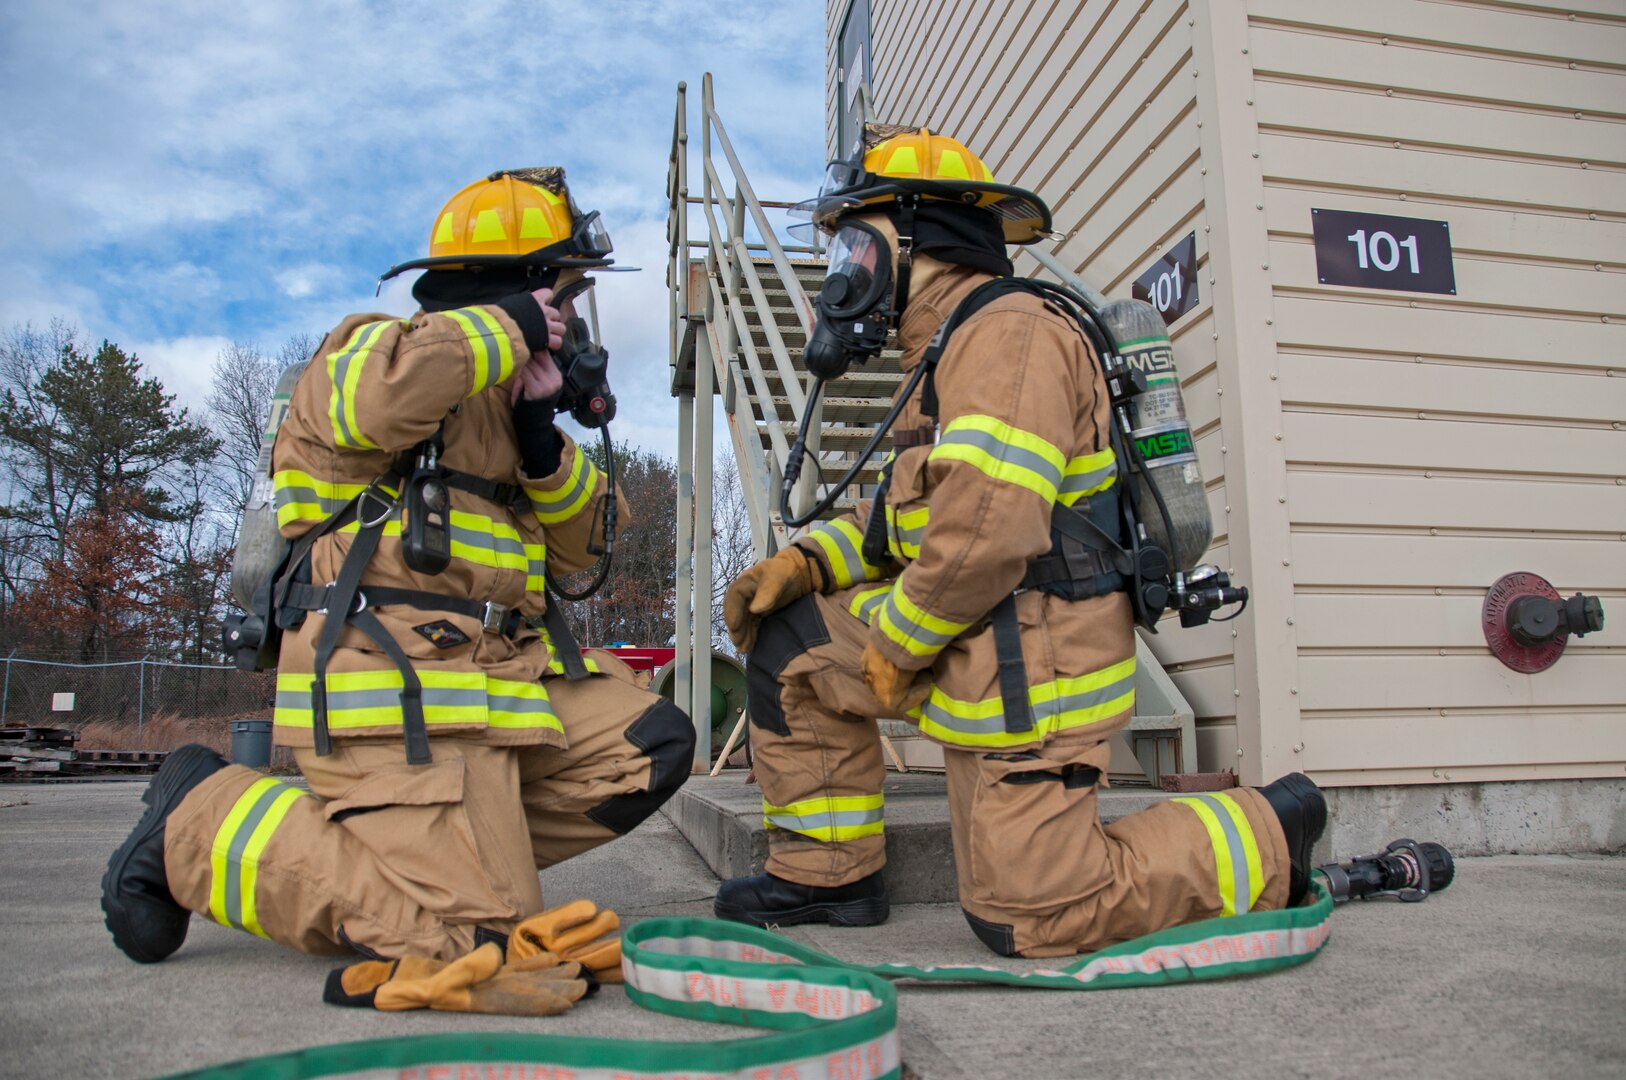 Airman 1st Class Thomas Ruffo and Senior Airman Dylan Nygren, 104th Civil Engineering Squadron firefighters, participate in live structural fire training Nov. 27, 2018, at Barnes Air National Guard Base, Massachusetts. The training ensures the Fire Attack Teams are prepared to respond to any fires on base or in the surrounding communities.